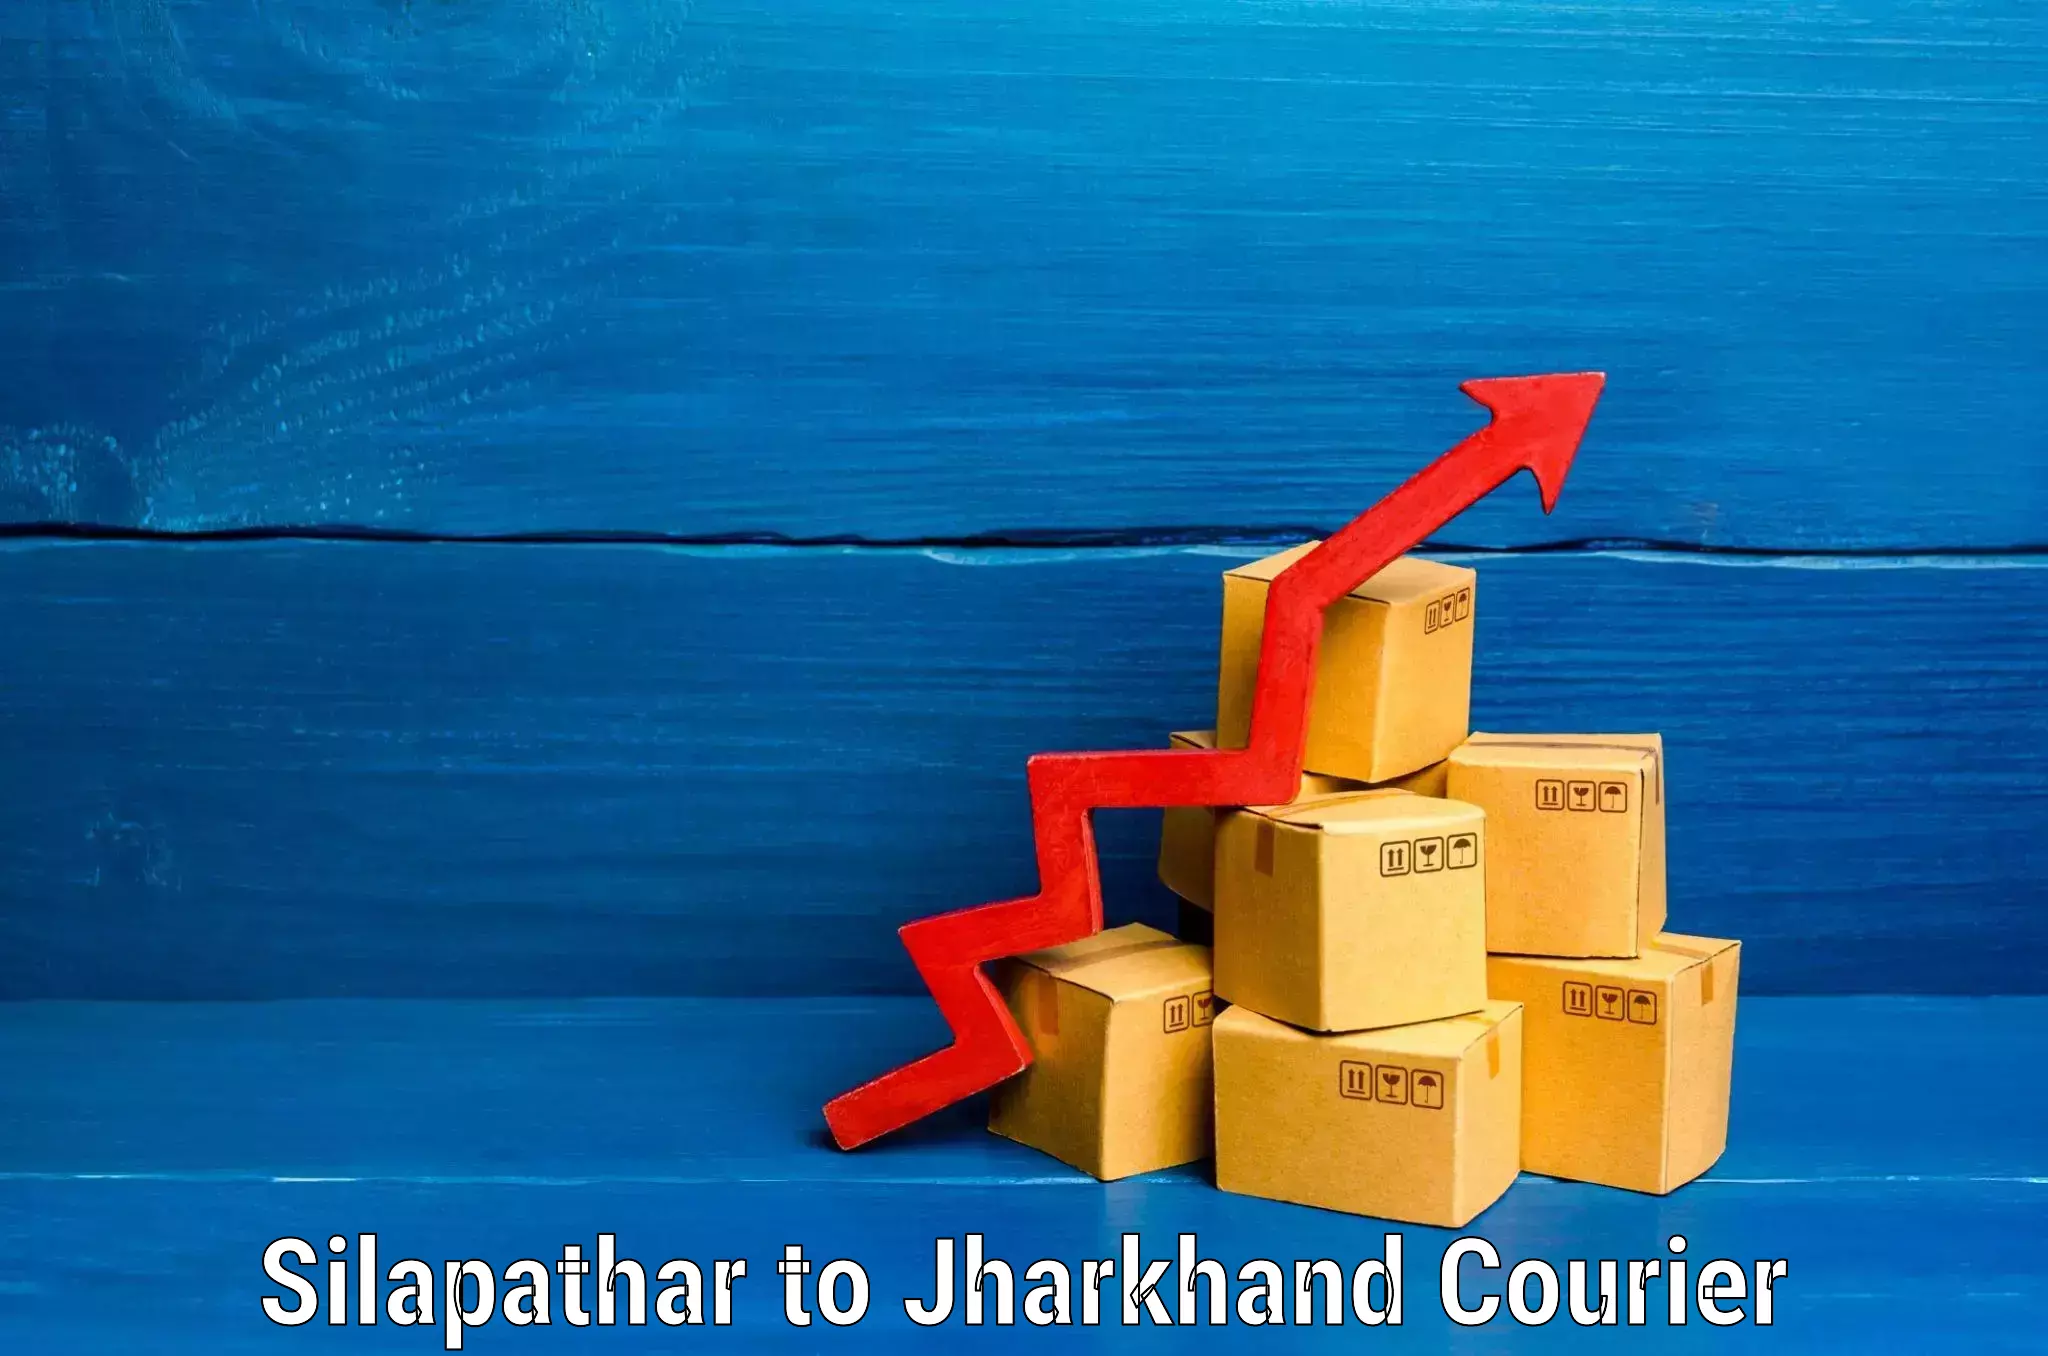 Luggage shipment specialists Silapathar to Gumia